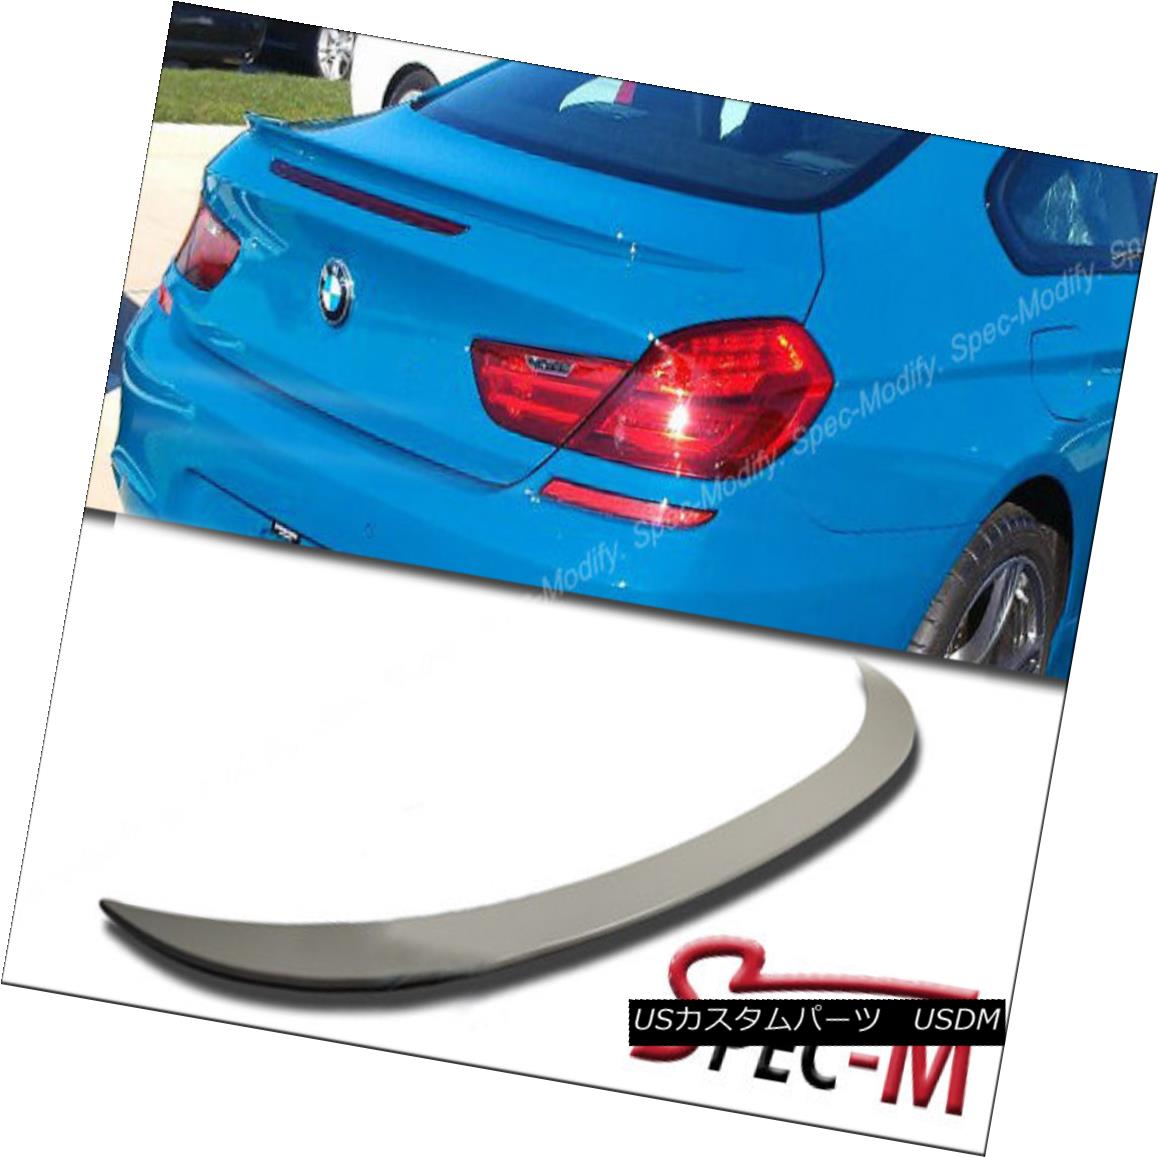 ѡ Painted M6 Look Trunk Wing Spoiler Lip For BMW F13 640i 650i M Coupe Only 2012+ ڥȤ줿M6åȥ󥯥󥰥ݥ顼åfor BMW F13 640i 650i MڤΤ2012+